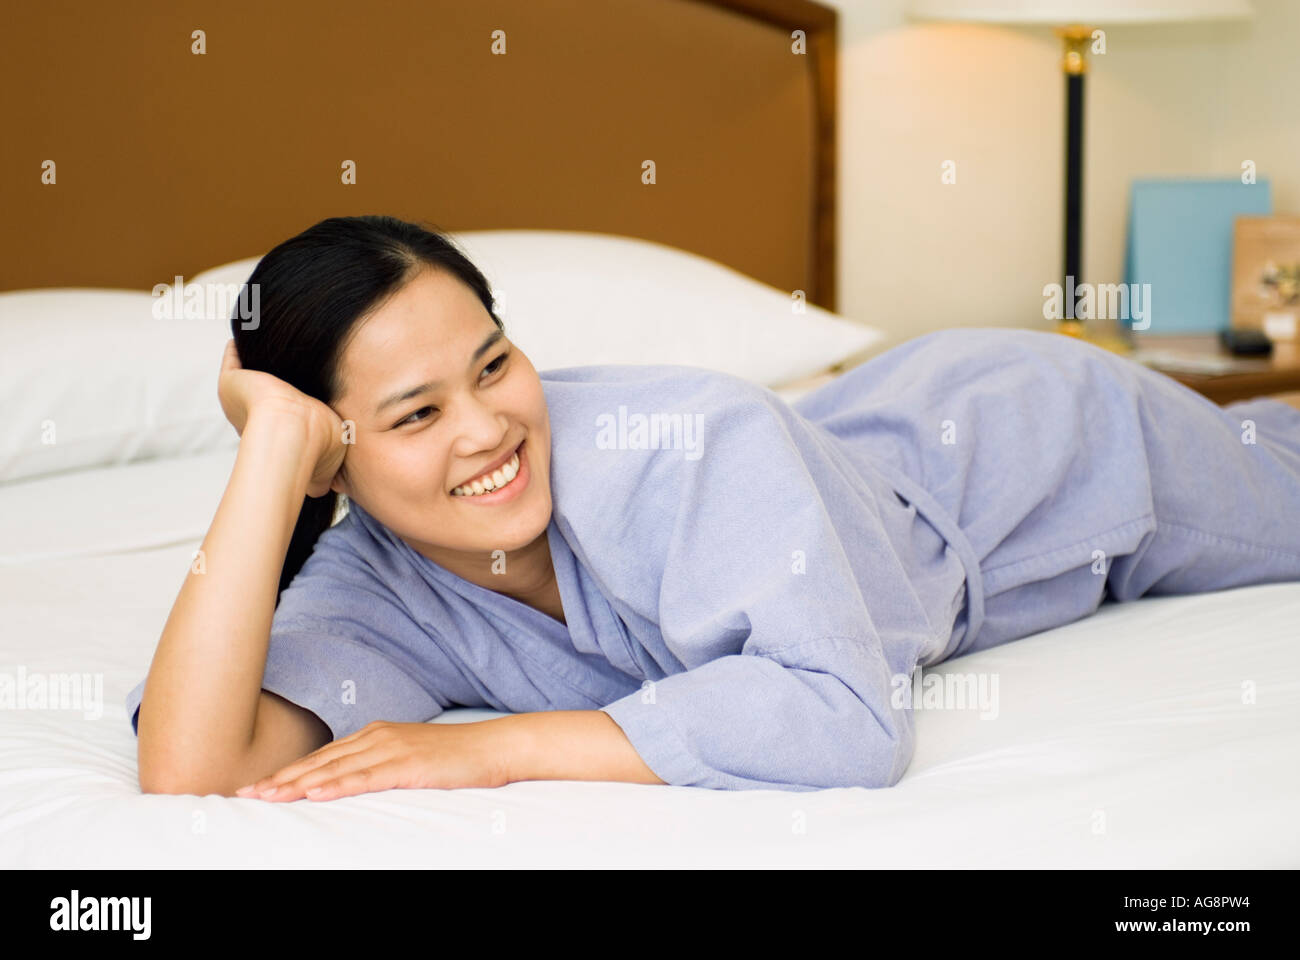 Asian Young Woman Lying On Bed In Hotel Room Watching TV Stock Photo